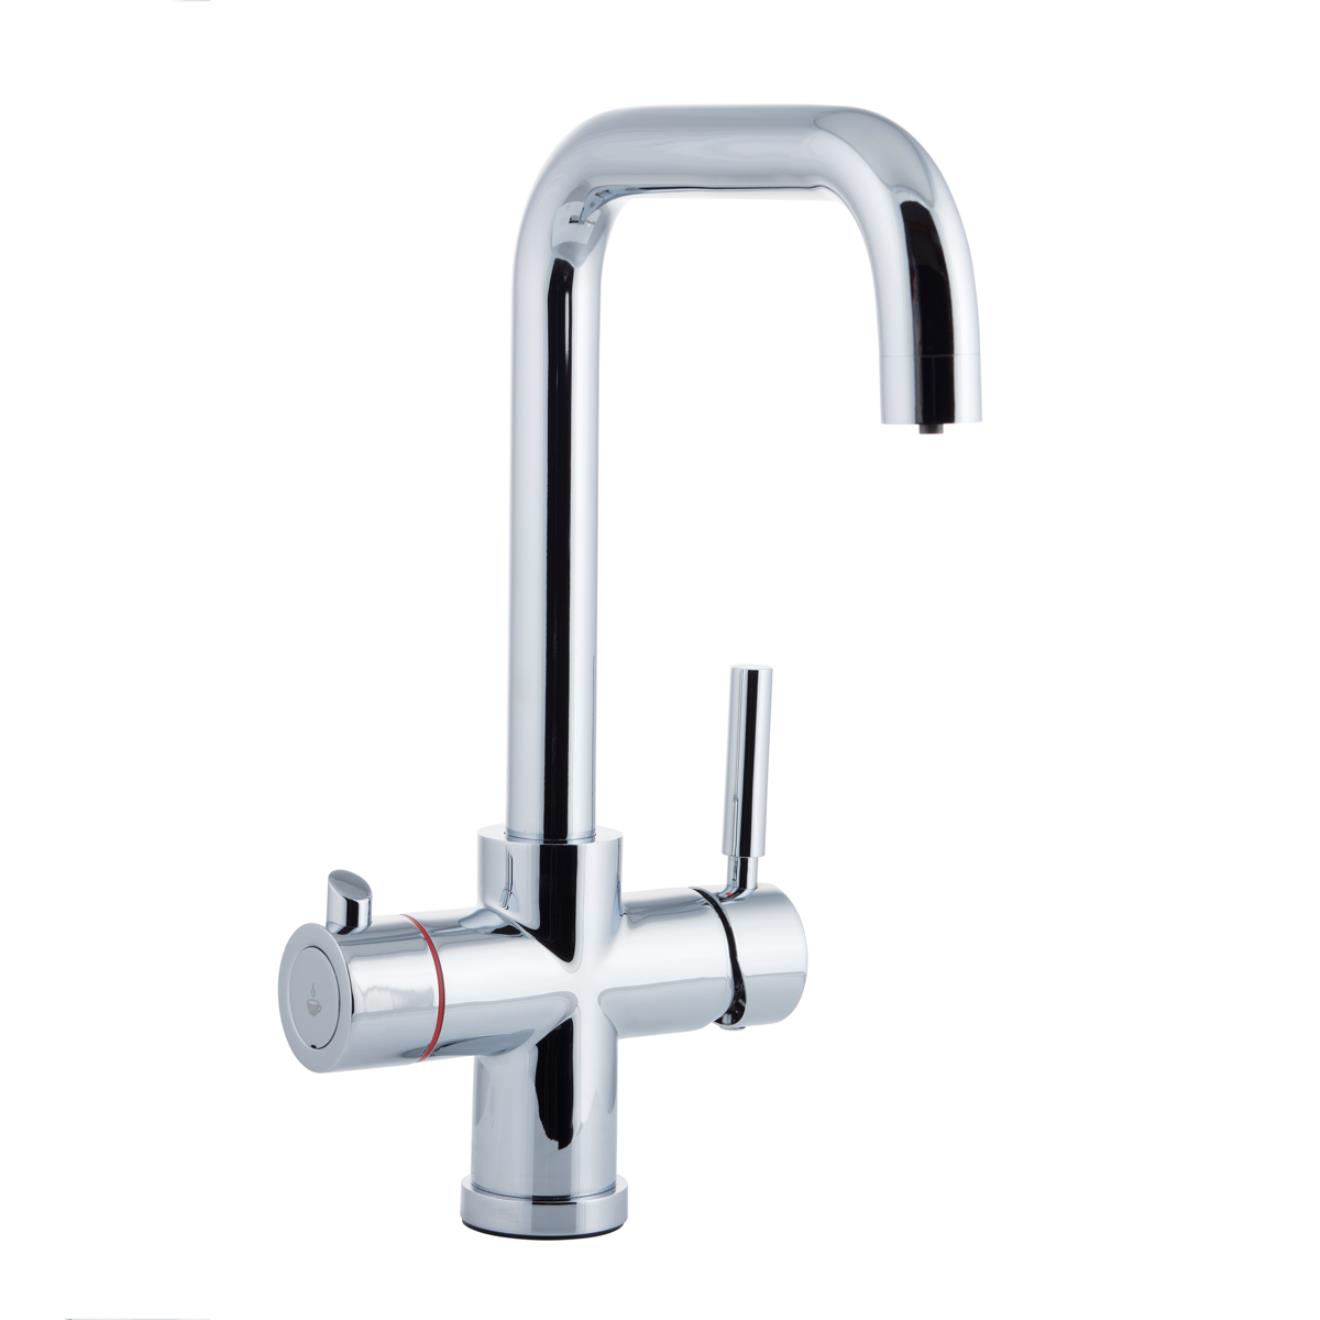 Amanzi 3 in 1 Instant Boiling Water Kitchen Tap Chrome